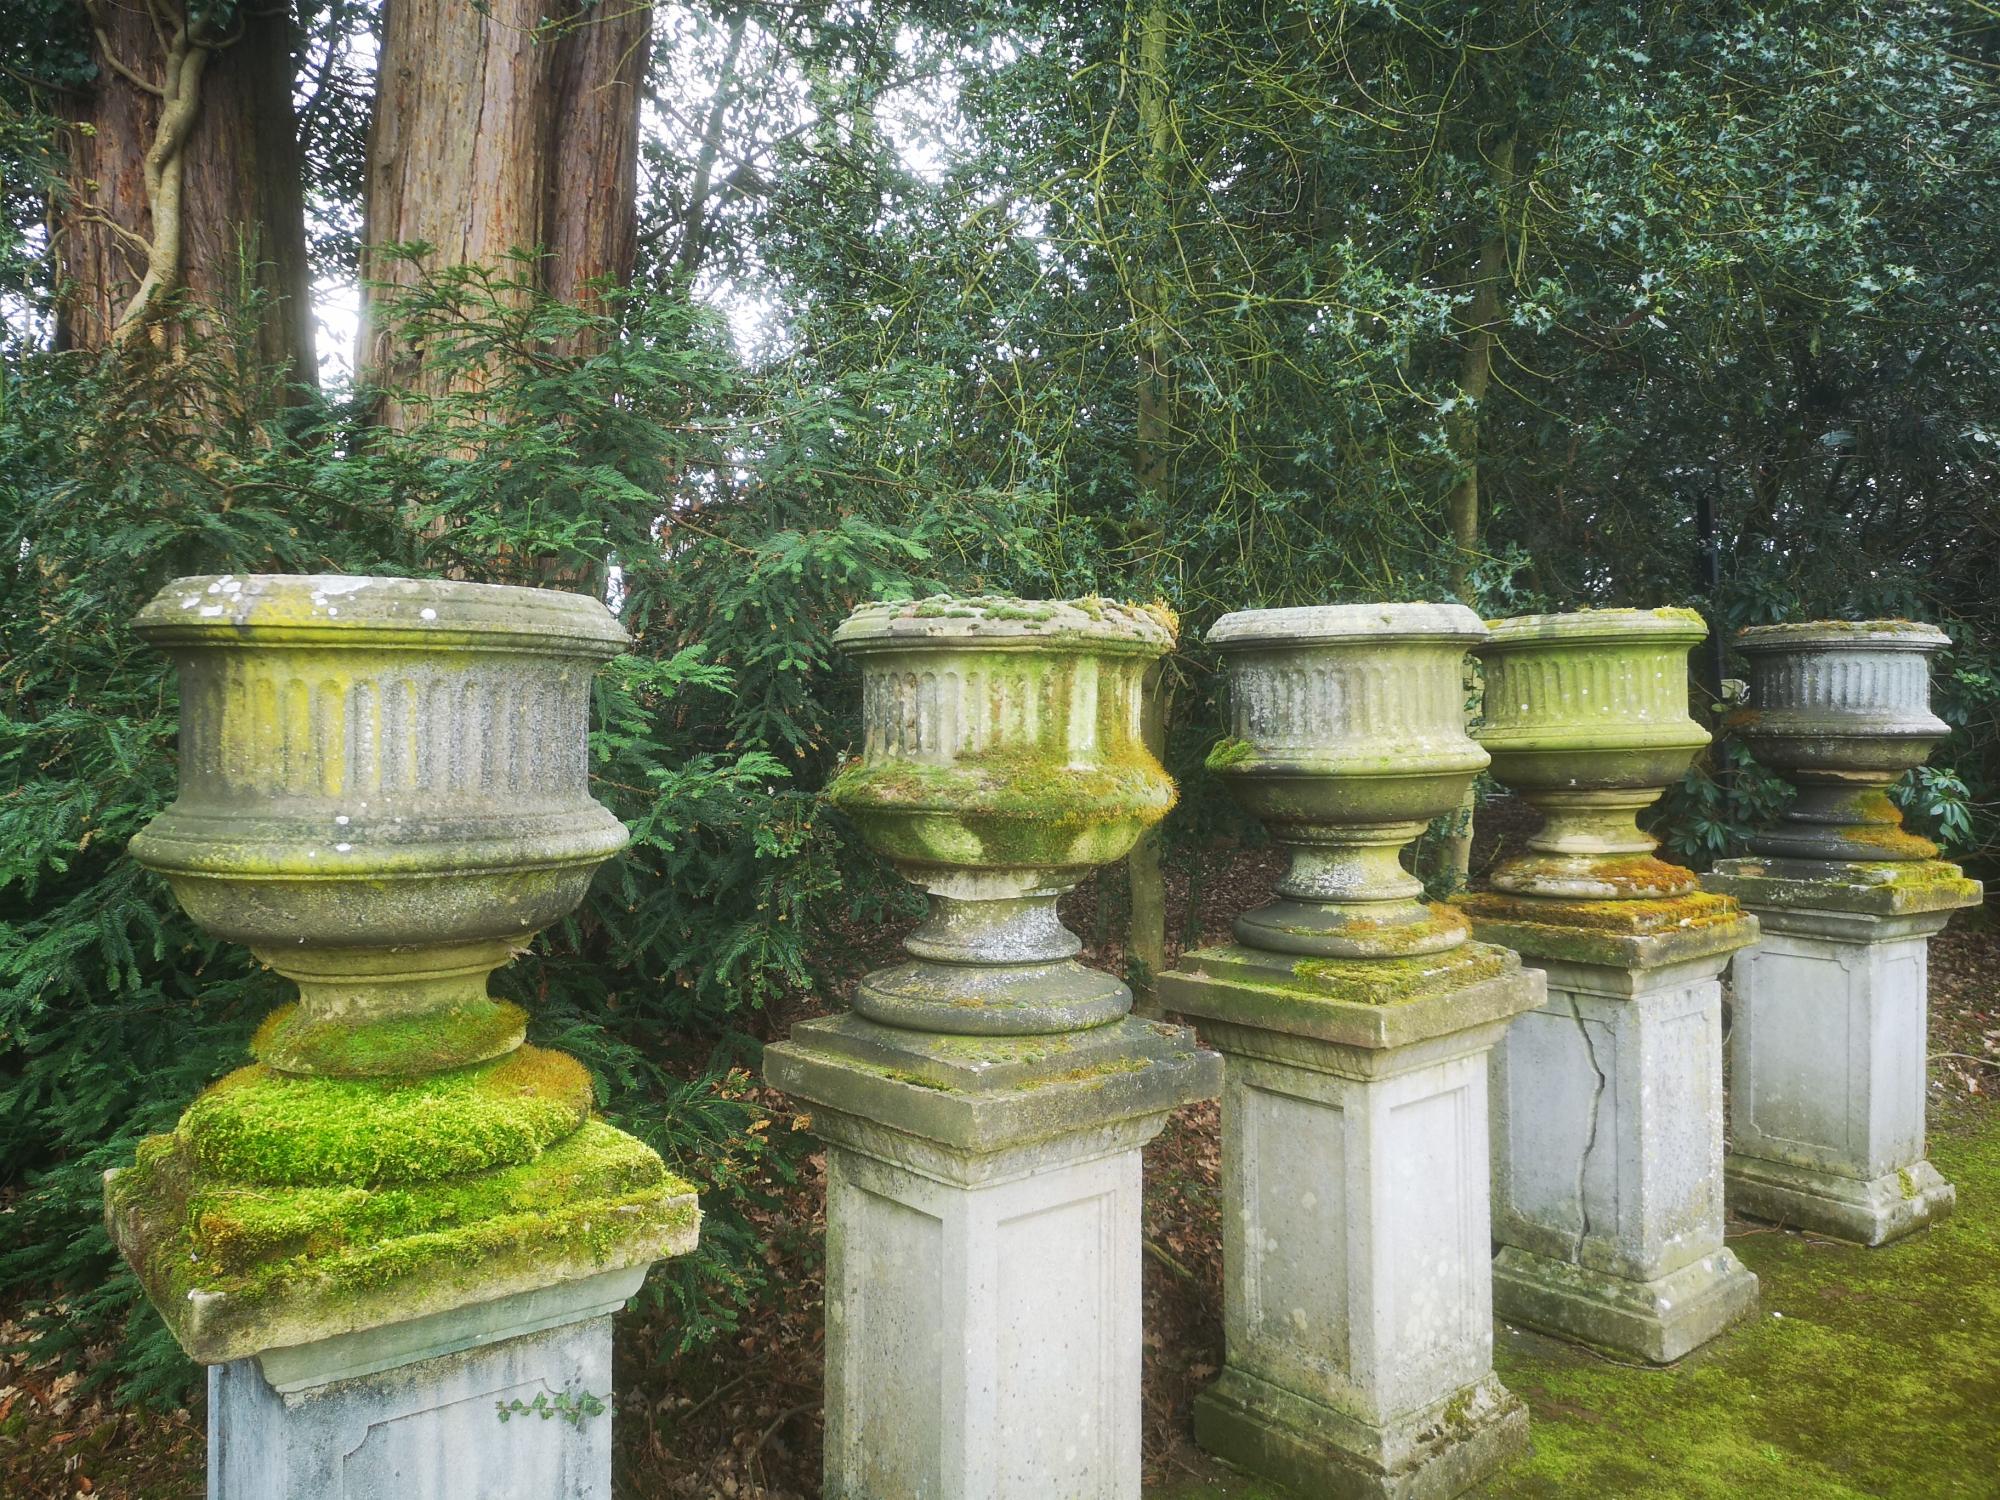 Garden pots and urns: A set of five Victorian carved sandstone urns, mid 19th century, 83cm high